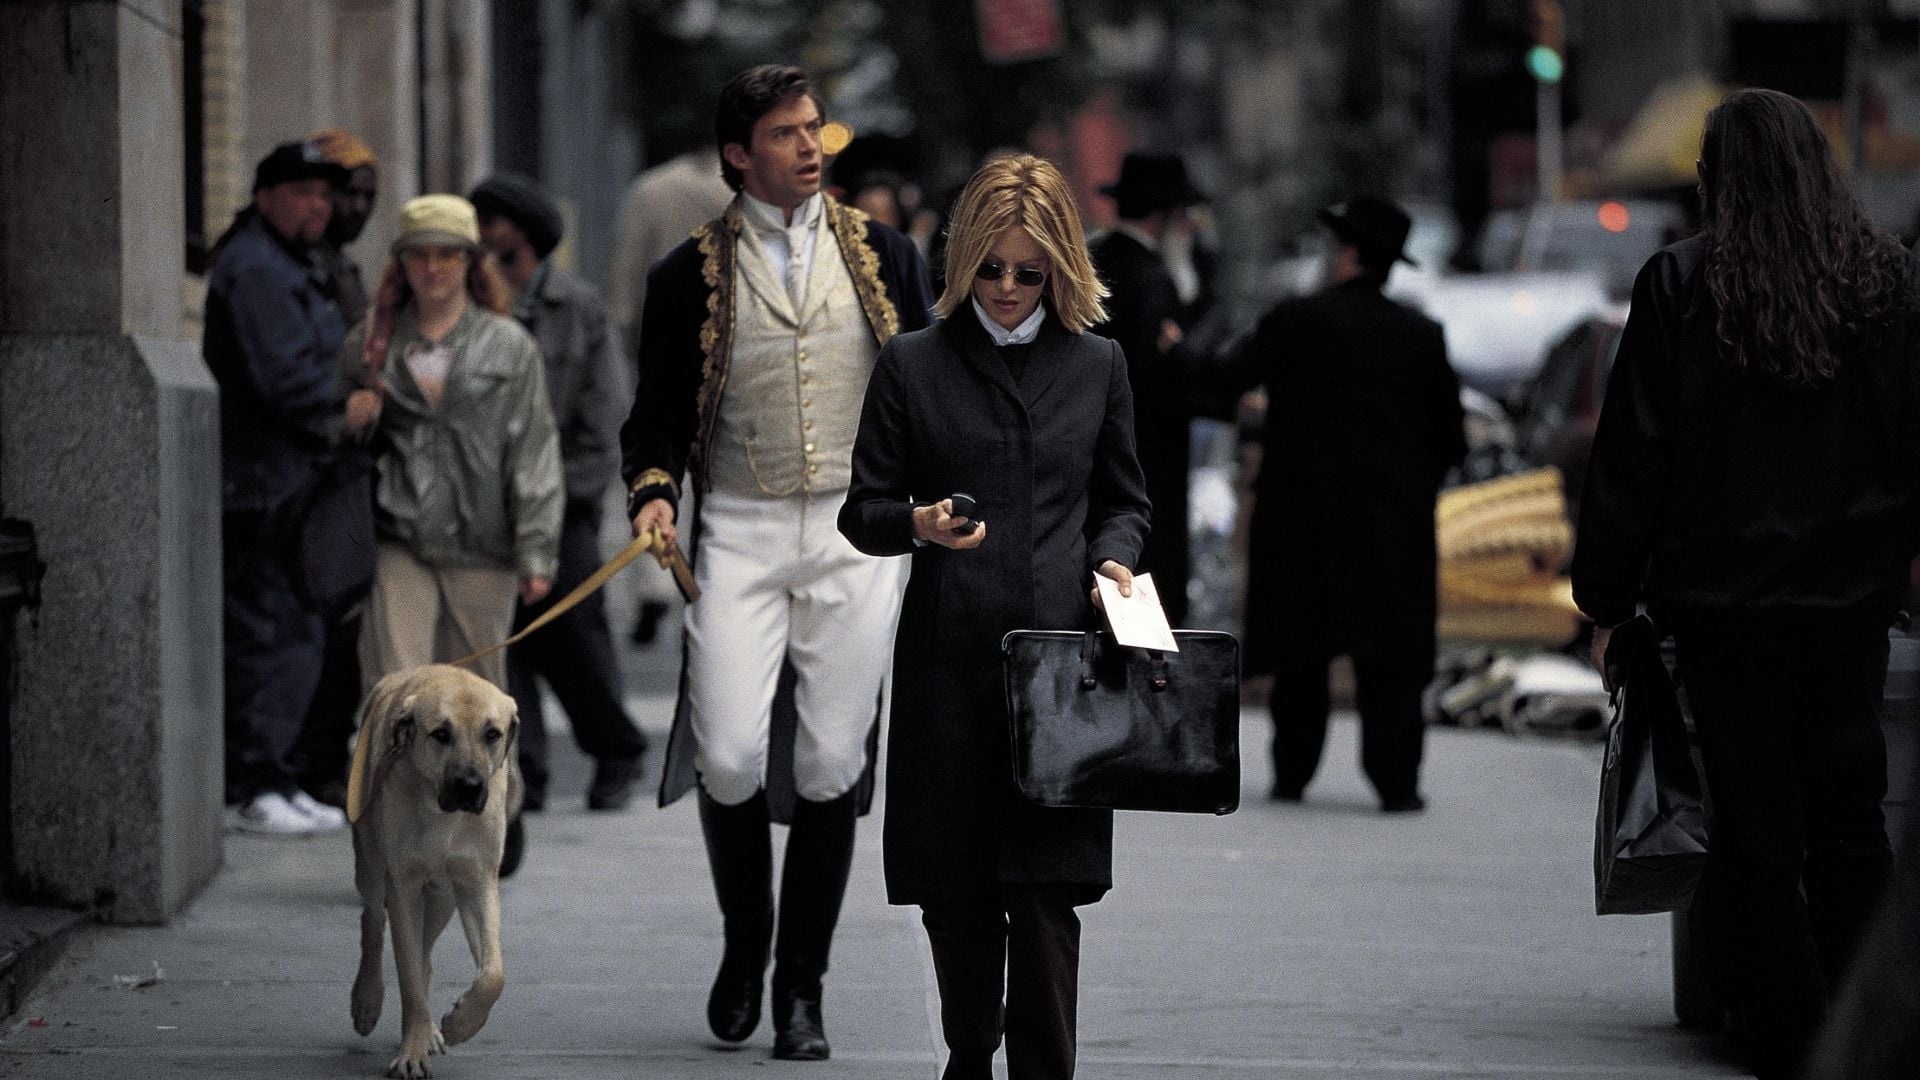 Kate and Leopold: The movie grossed $76 million worldwide on a $48 million budget. 1920x1080 Full HD Background.